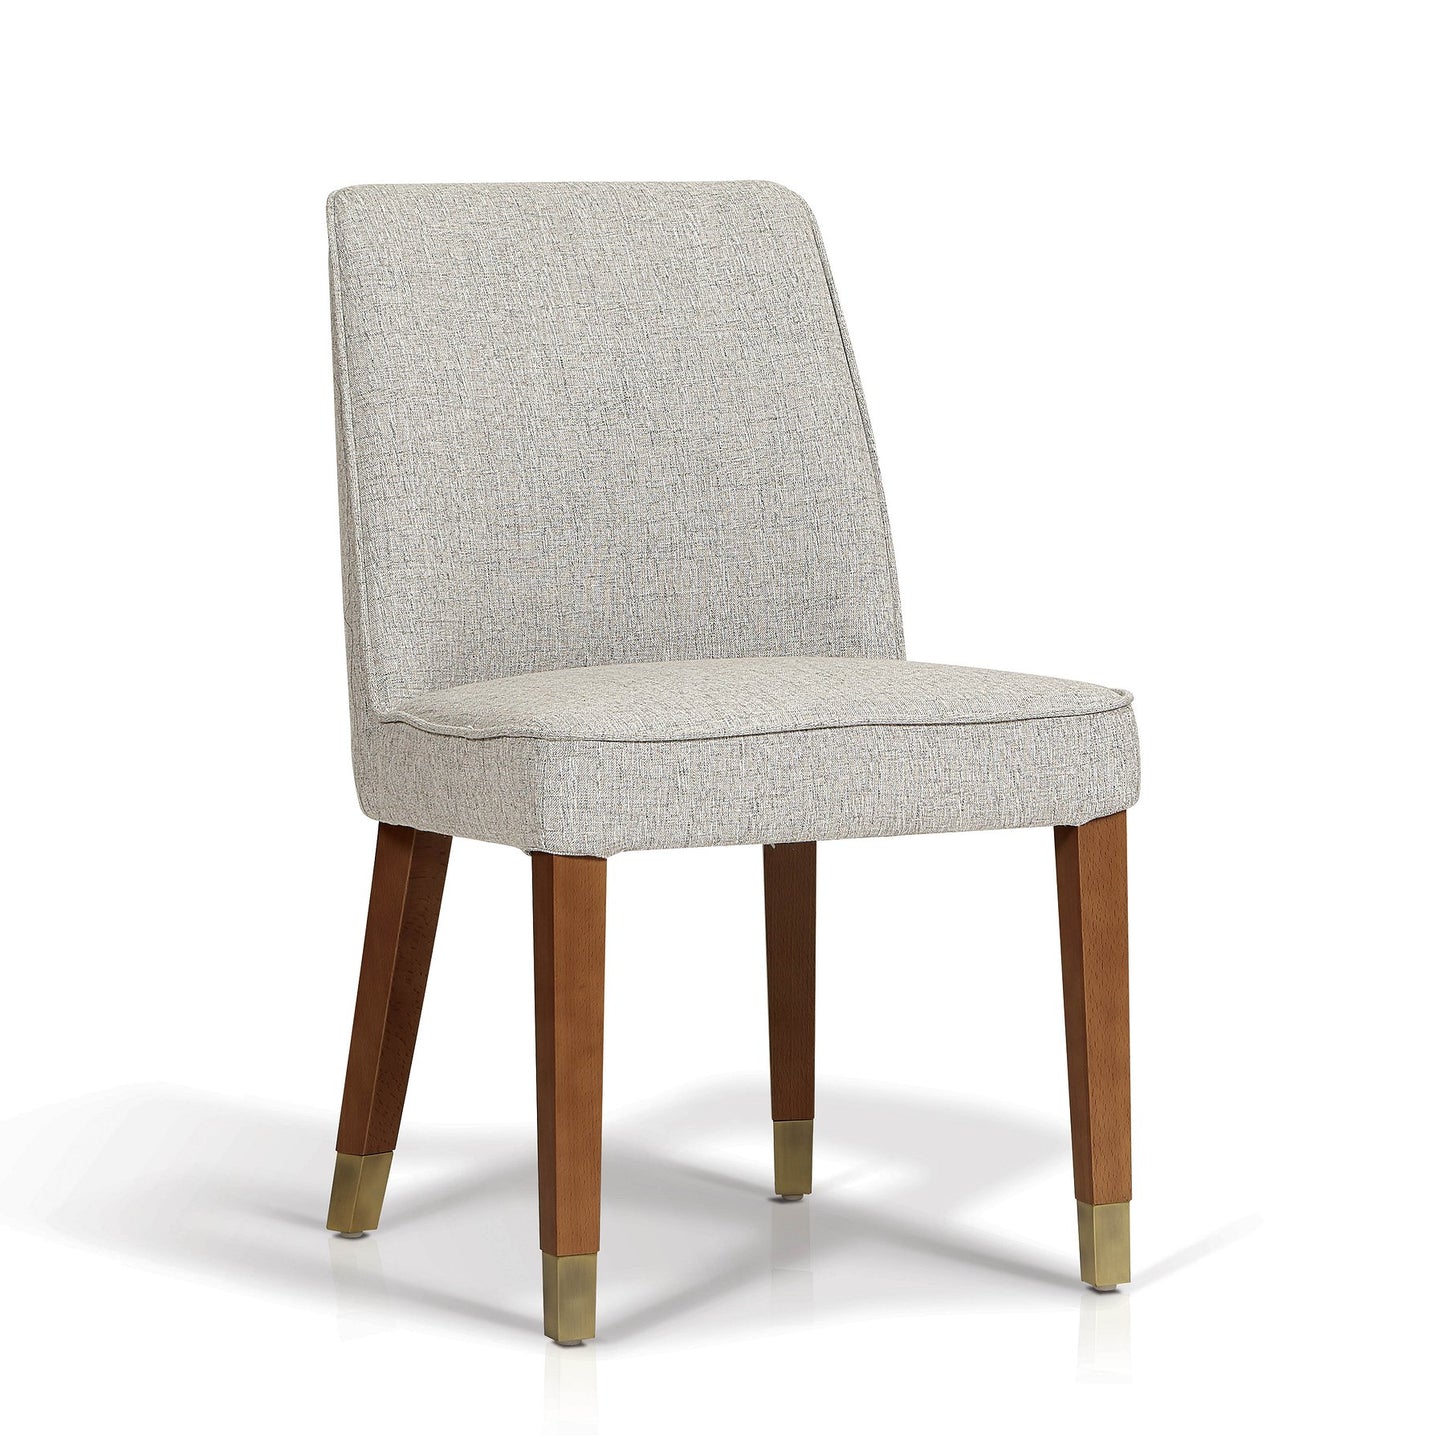 SKY13056 kerry - dining chair - Dreamart Gallery